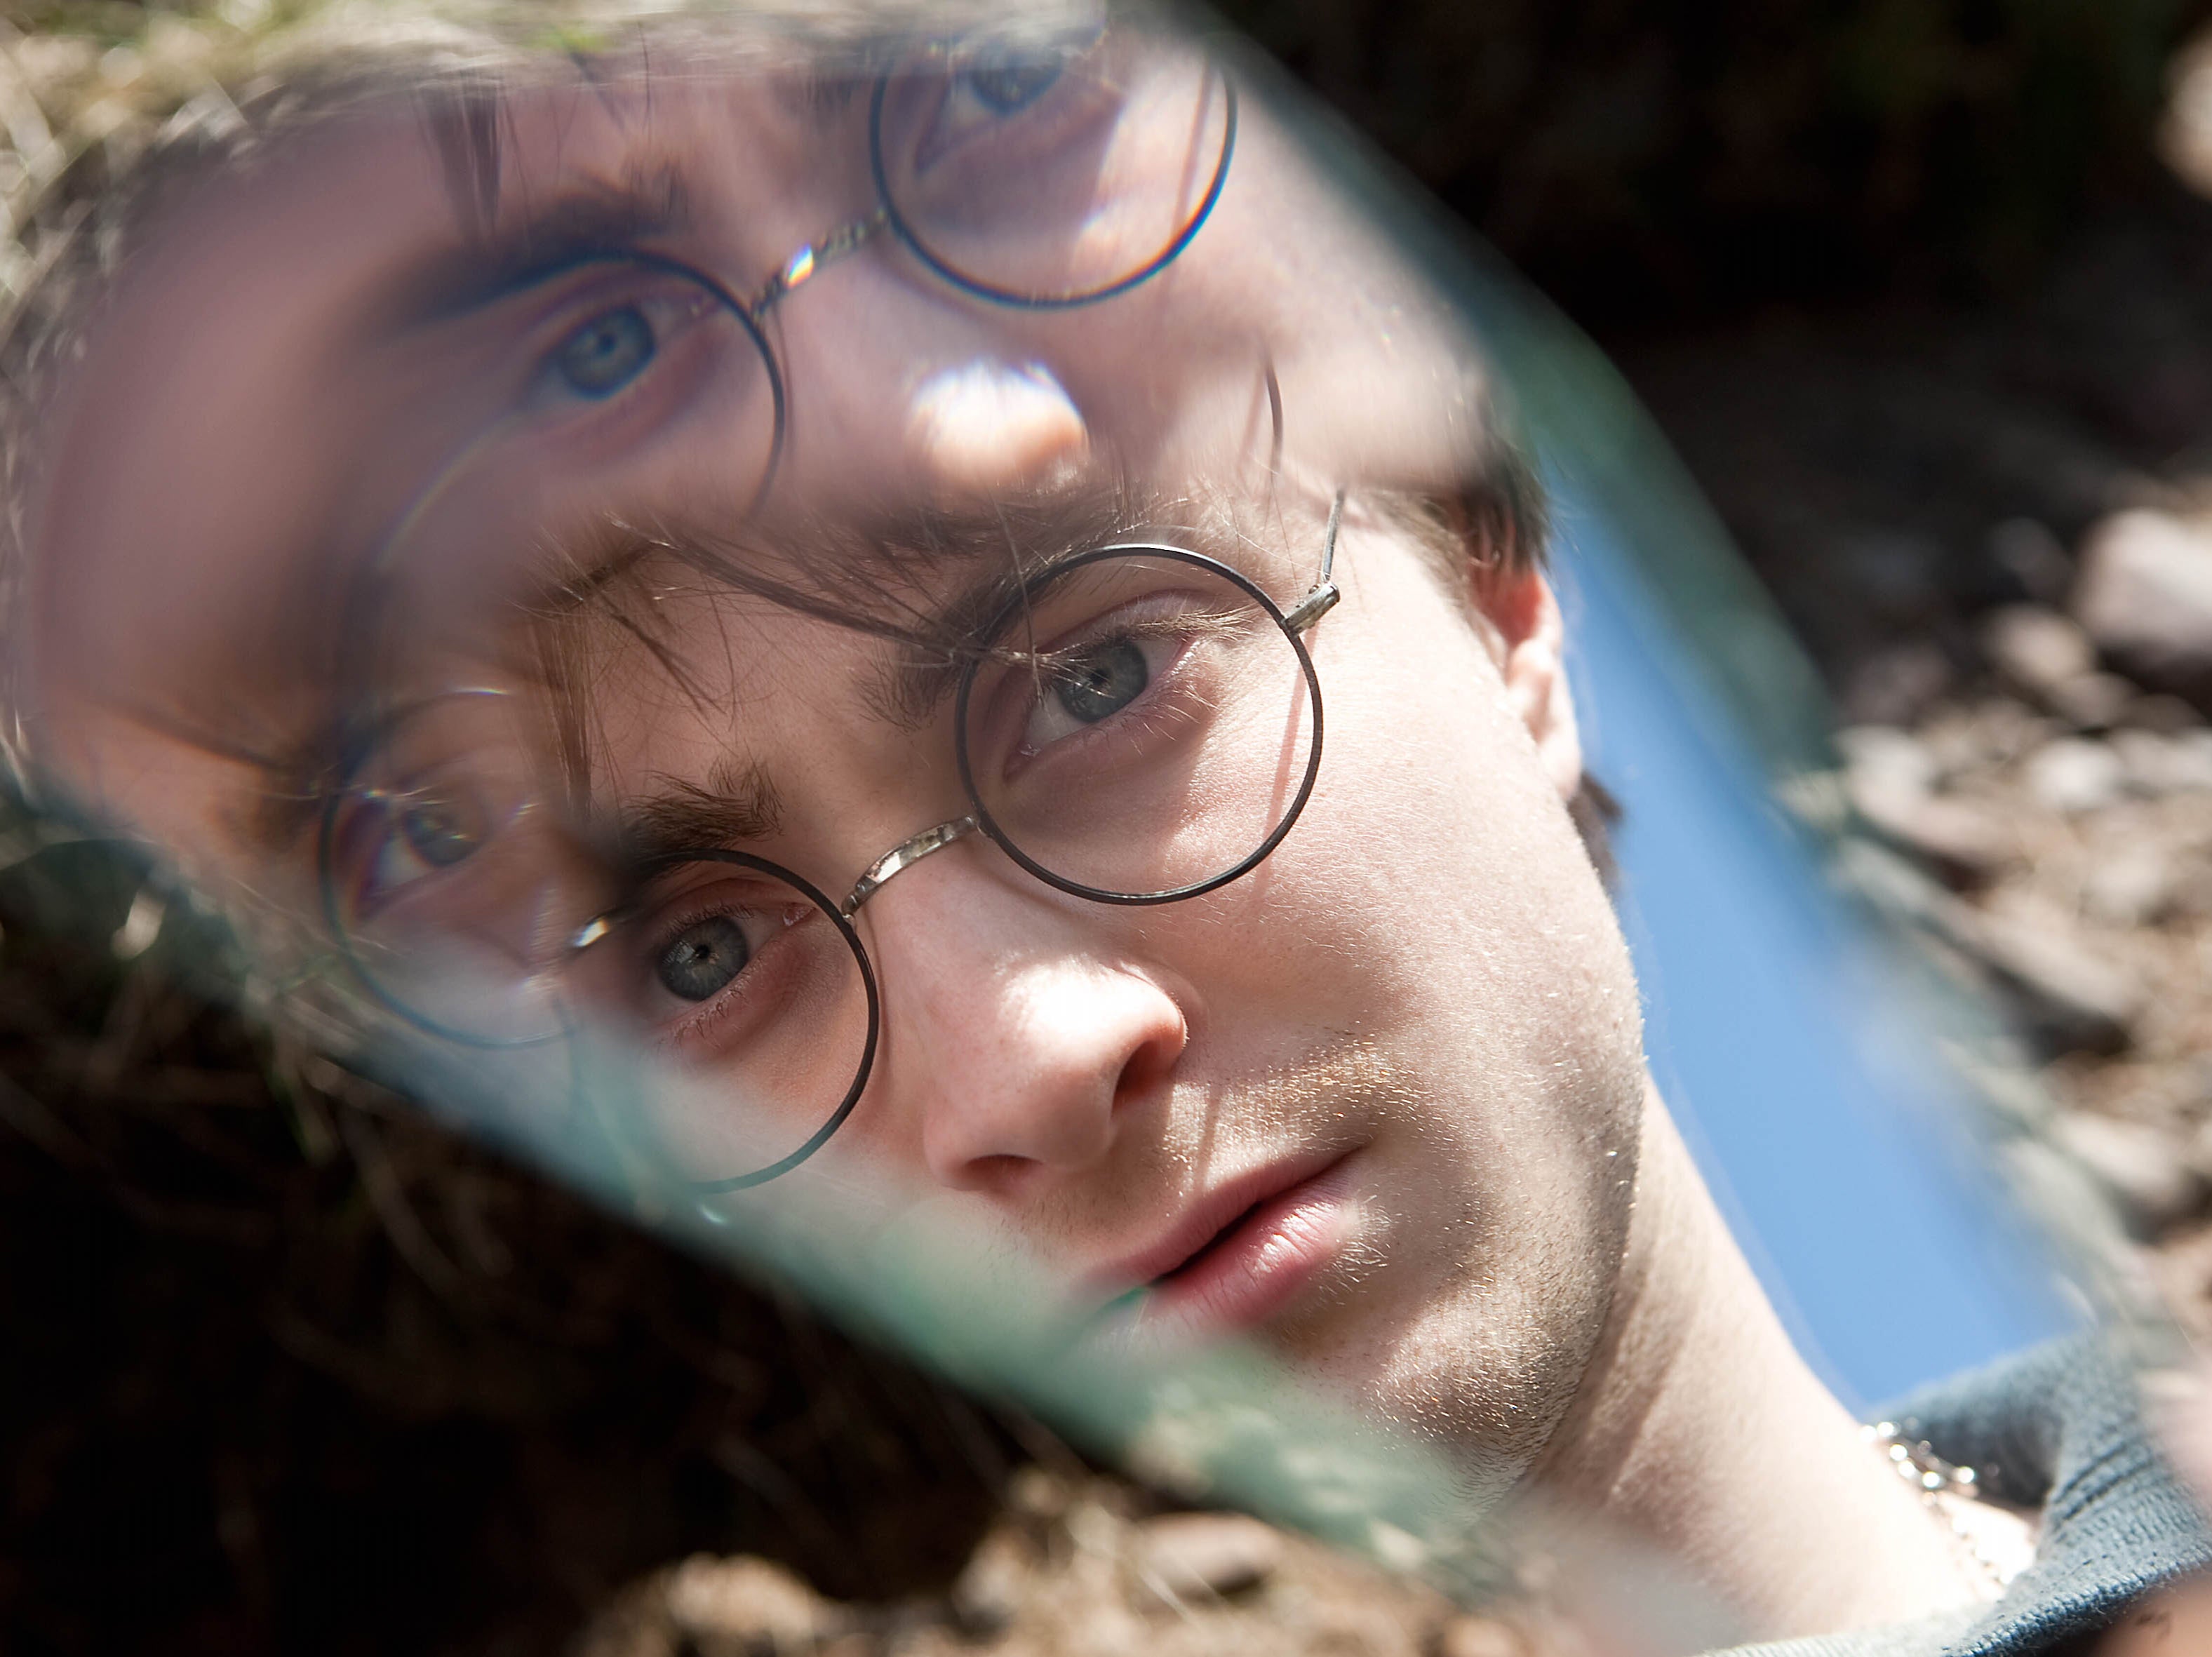 Daniel Radcliffe in ‘Harry Potter and the Deathly Hallows Part 1'